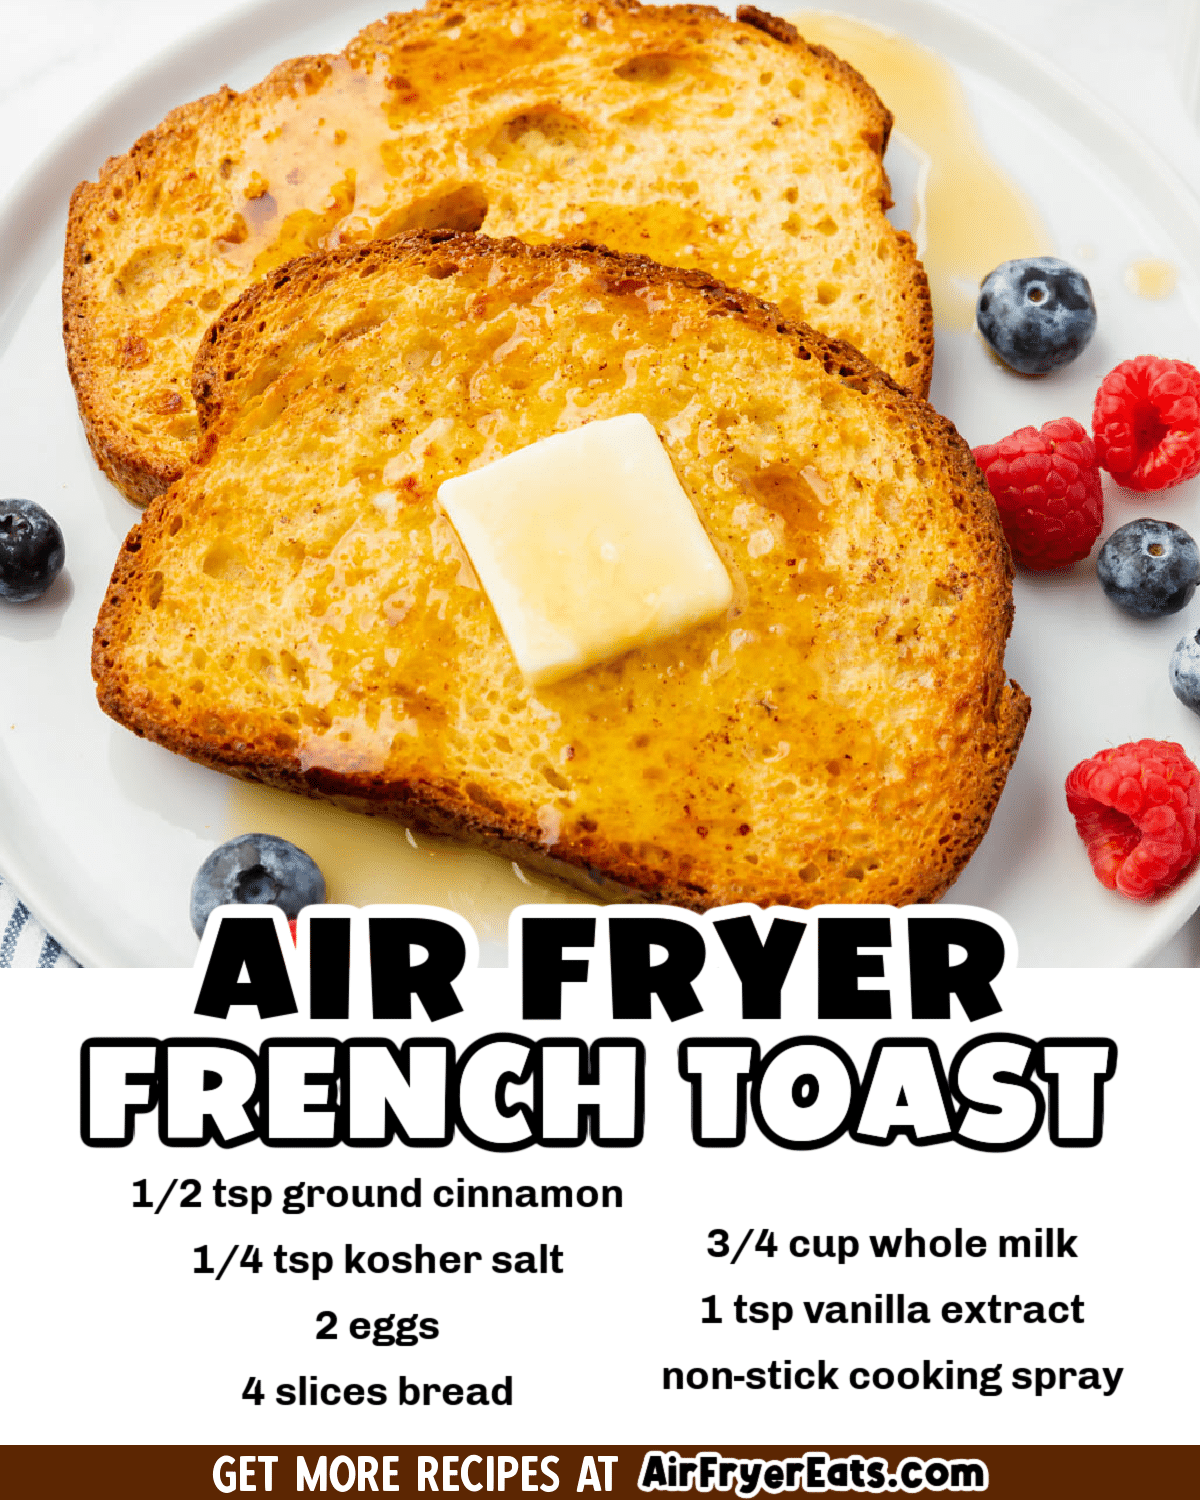 Rich, custardy, perfectly cooked French Toast is a snap to make in your air fryer! Air Fryer French Toast will be a family favorite, and it's easy enough to make on even the busiest mornings. via @vegetarianmamma